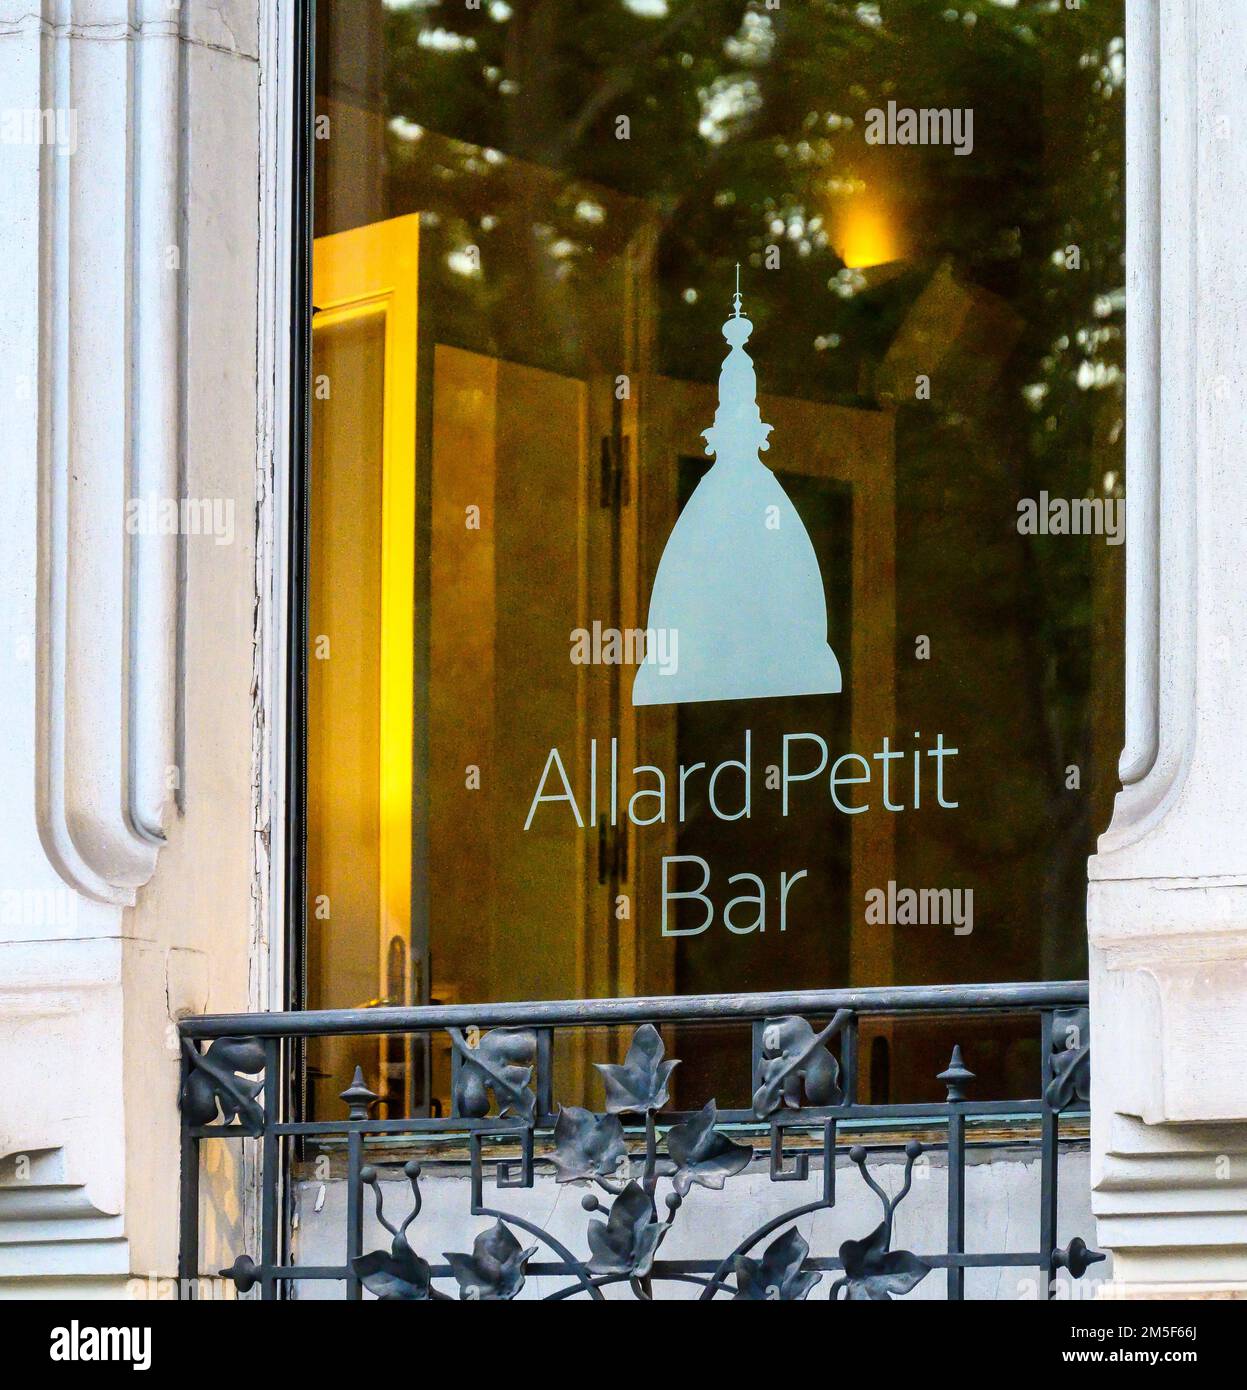 Logo and sign of the Allard Petit bar in a building window. Stock Photo